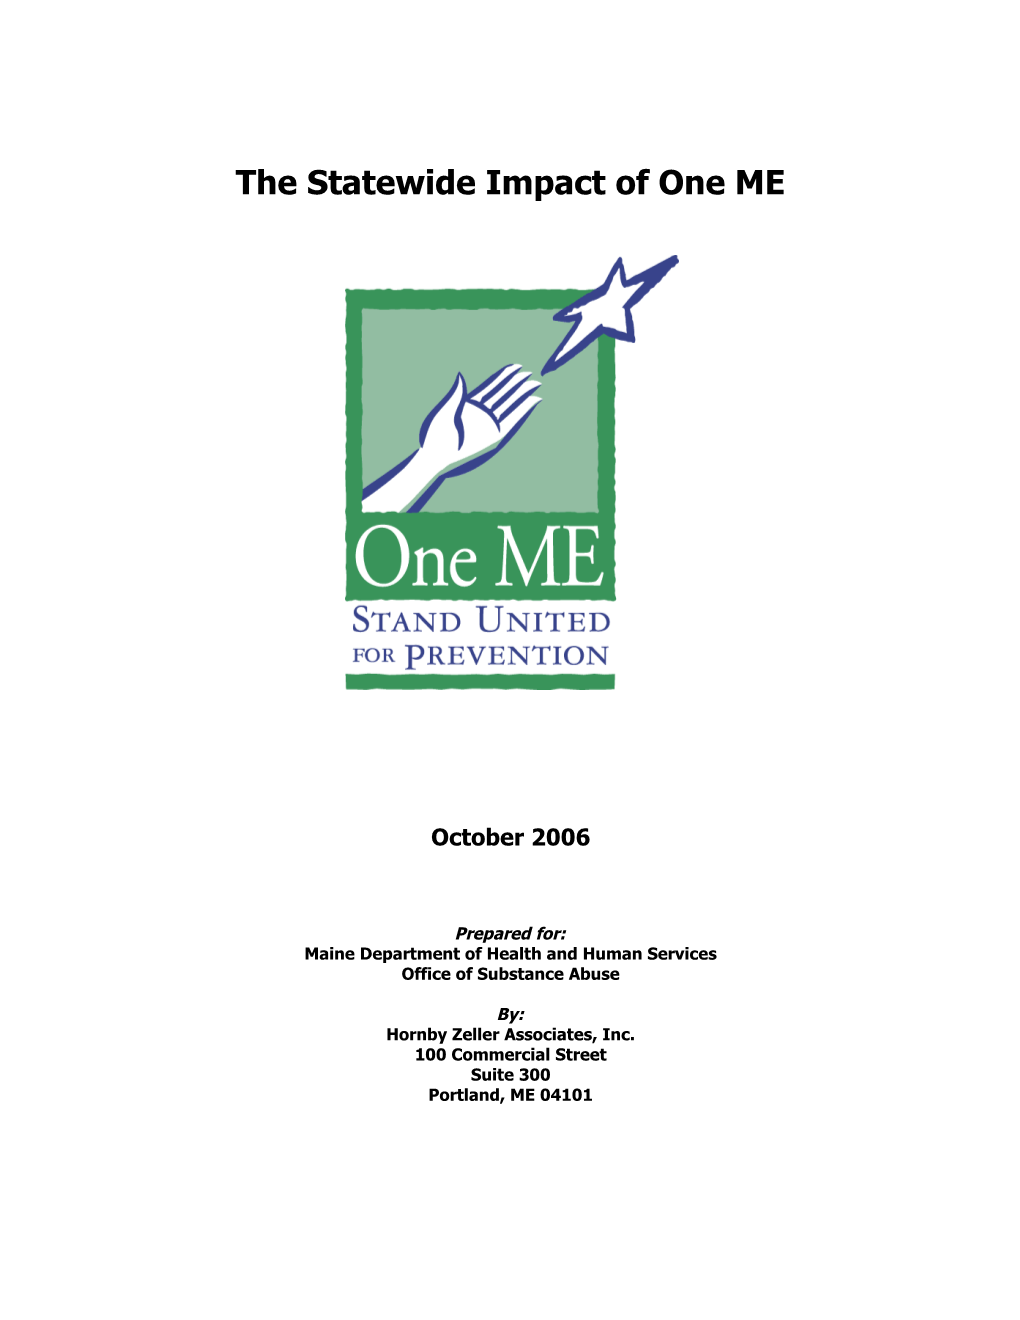 One ME: the Statewide Impact